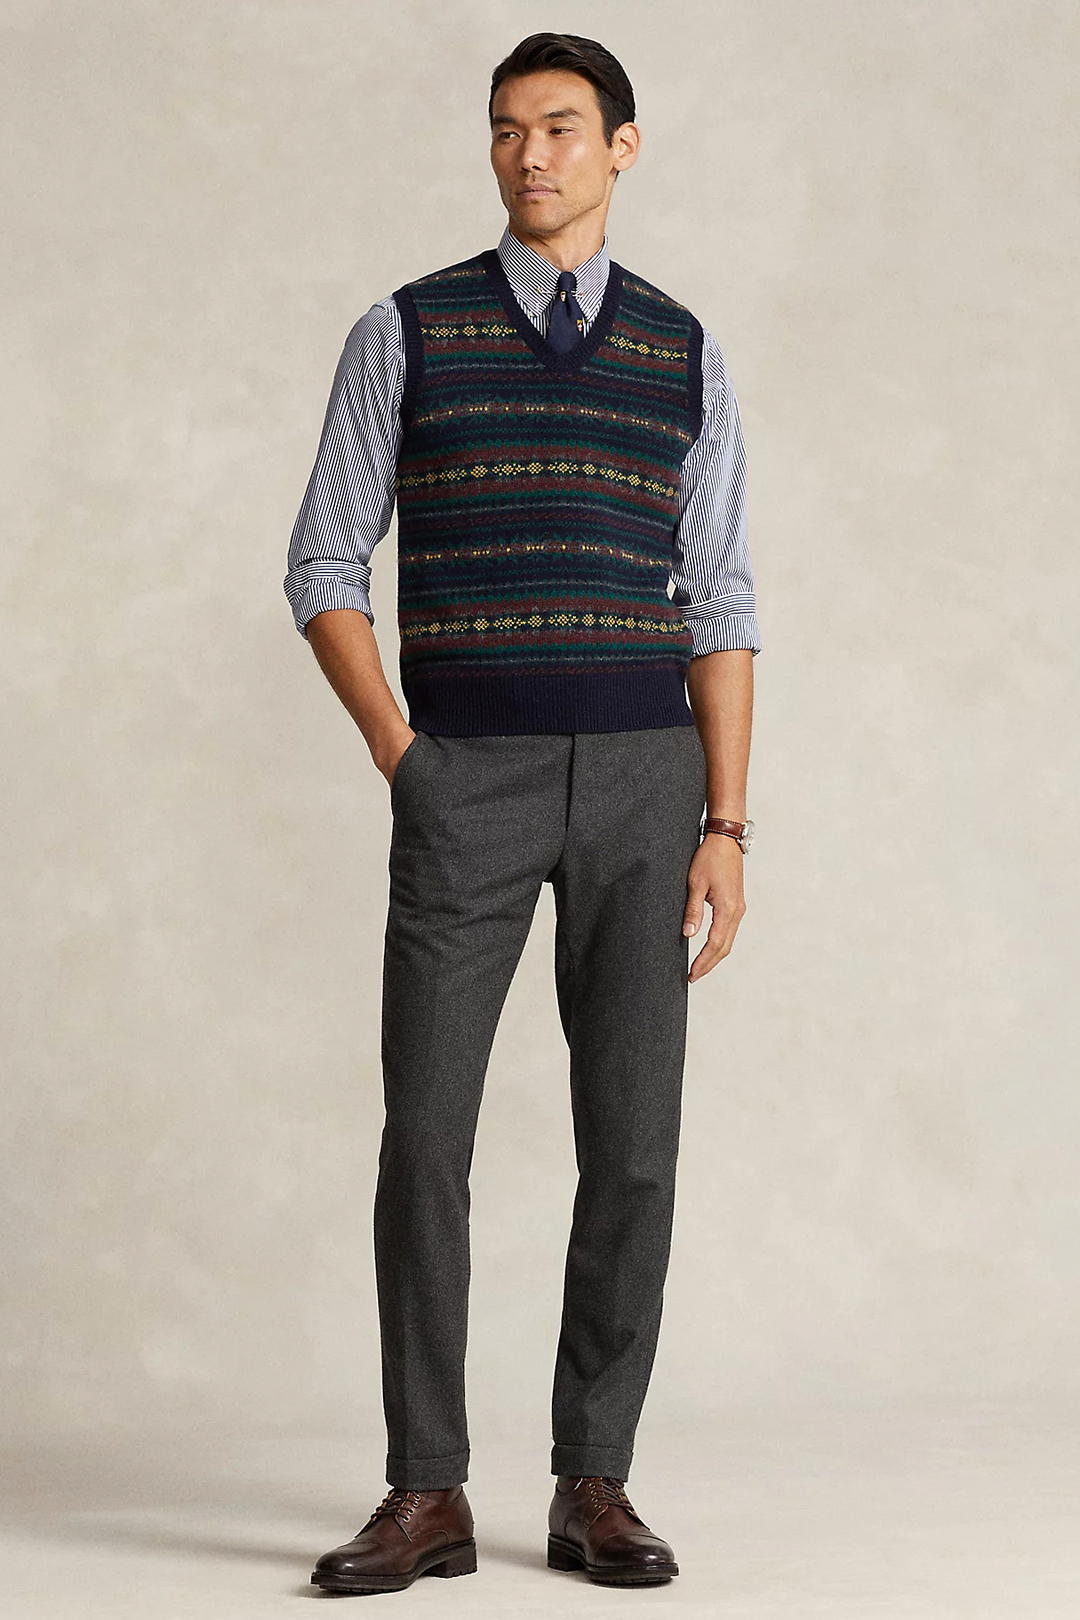 Navy sweater vest, blue shirt, navy tie, charcoal dress pants and dark brown dress boots outfit